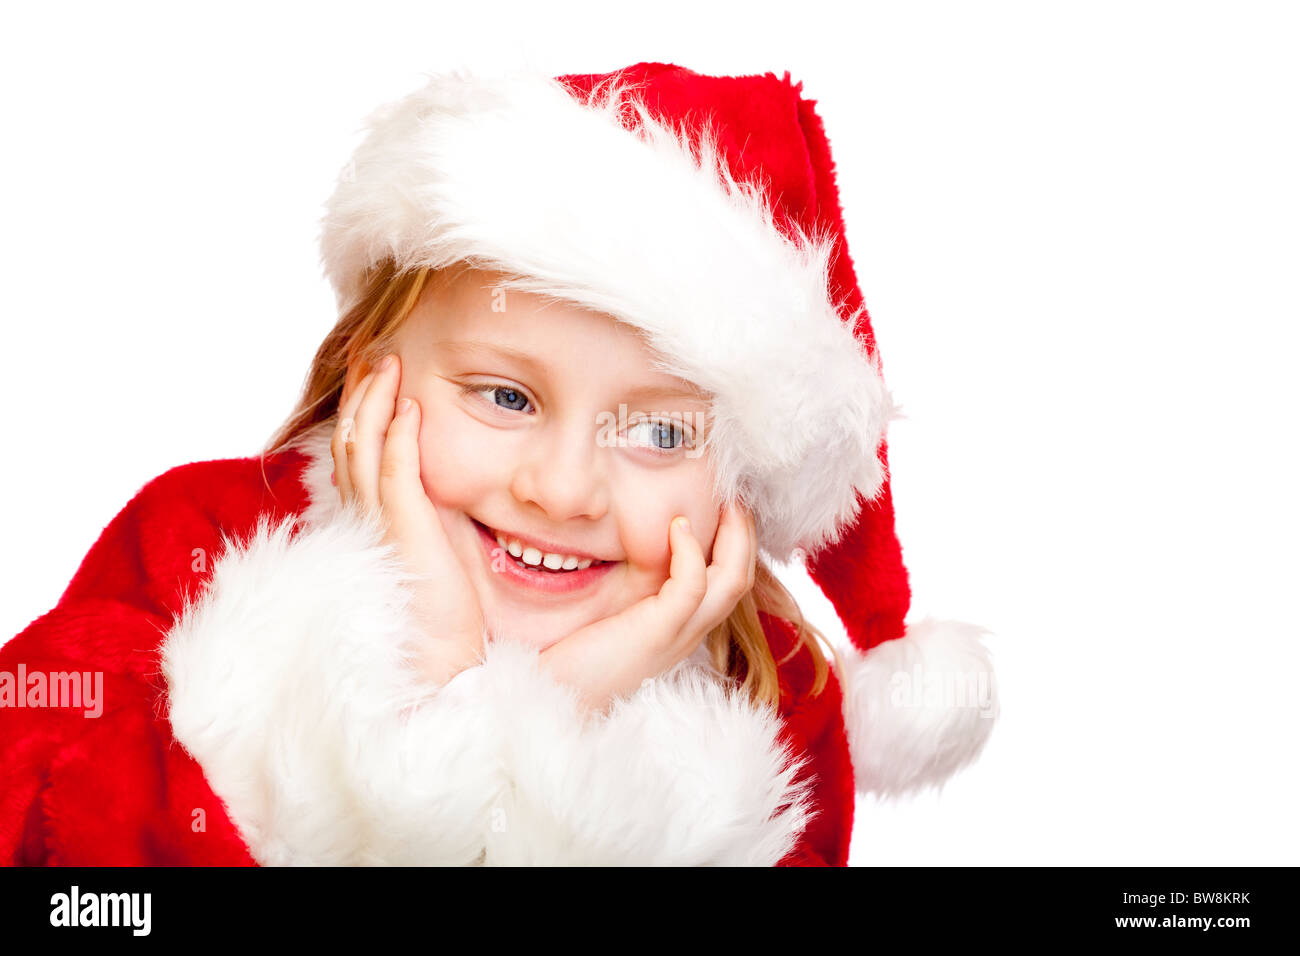 Small girl dressed as Santa Claus smiles happy.  Isolated on white background. Stock Photo